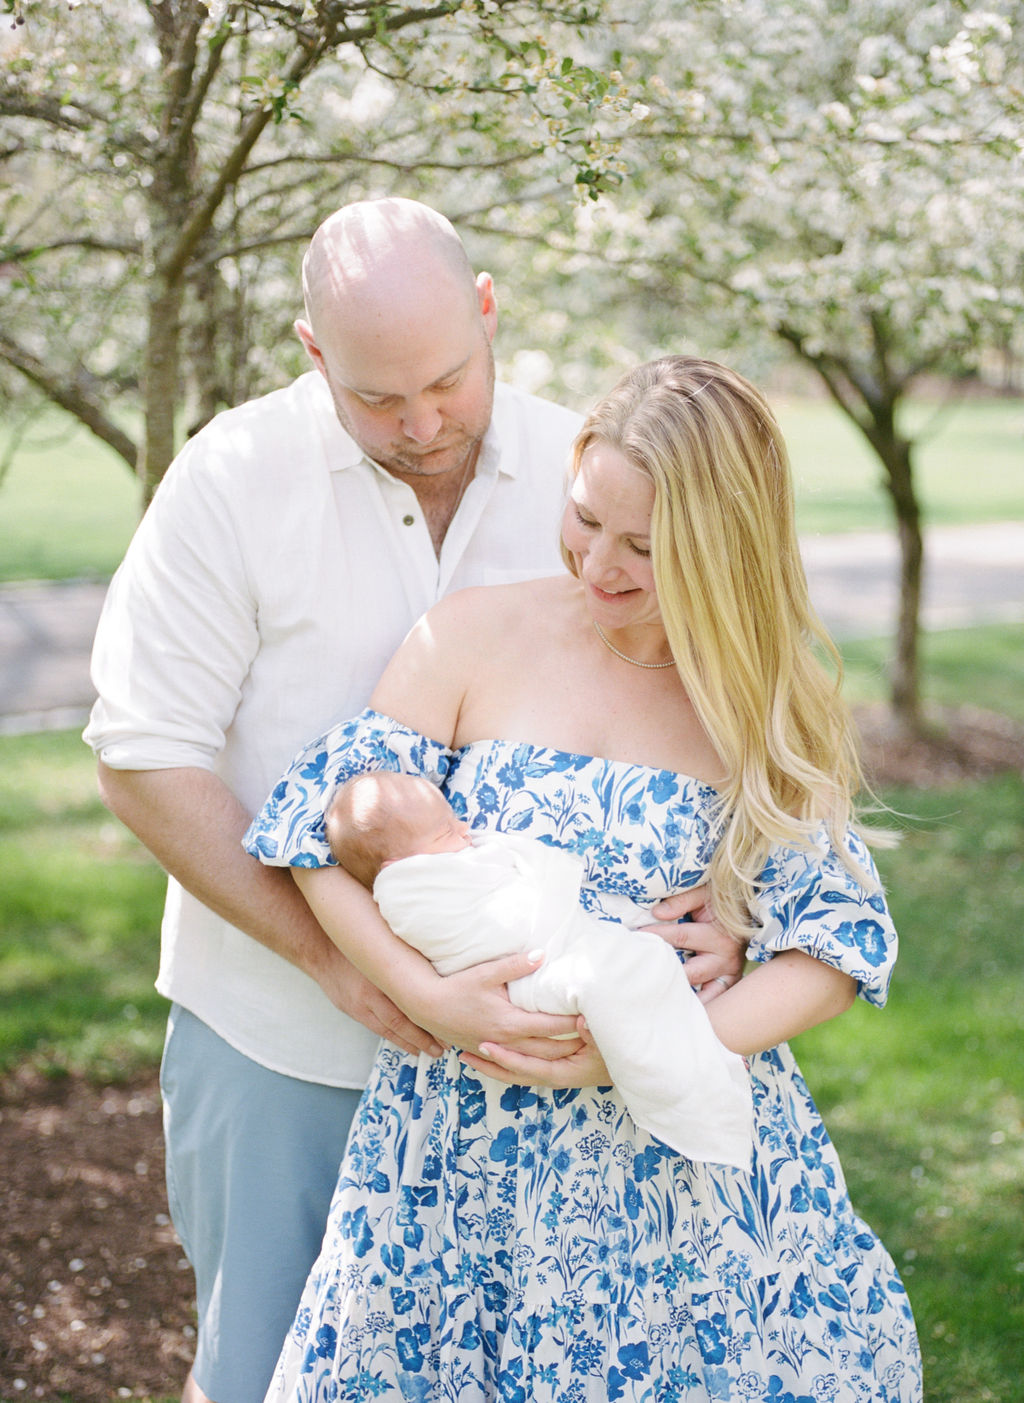 A new dad hugs mom while she holds their sleeping newborn baby and stands in a park under flowering trees